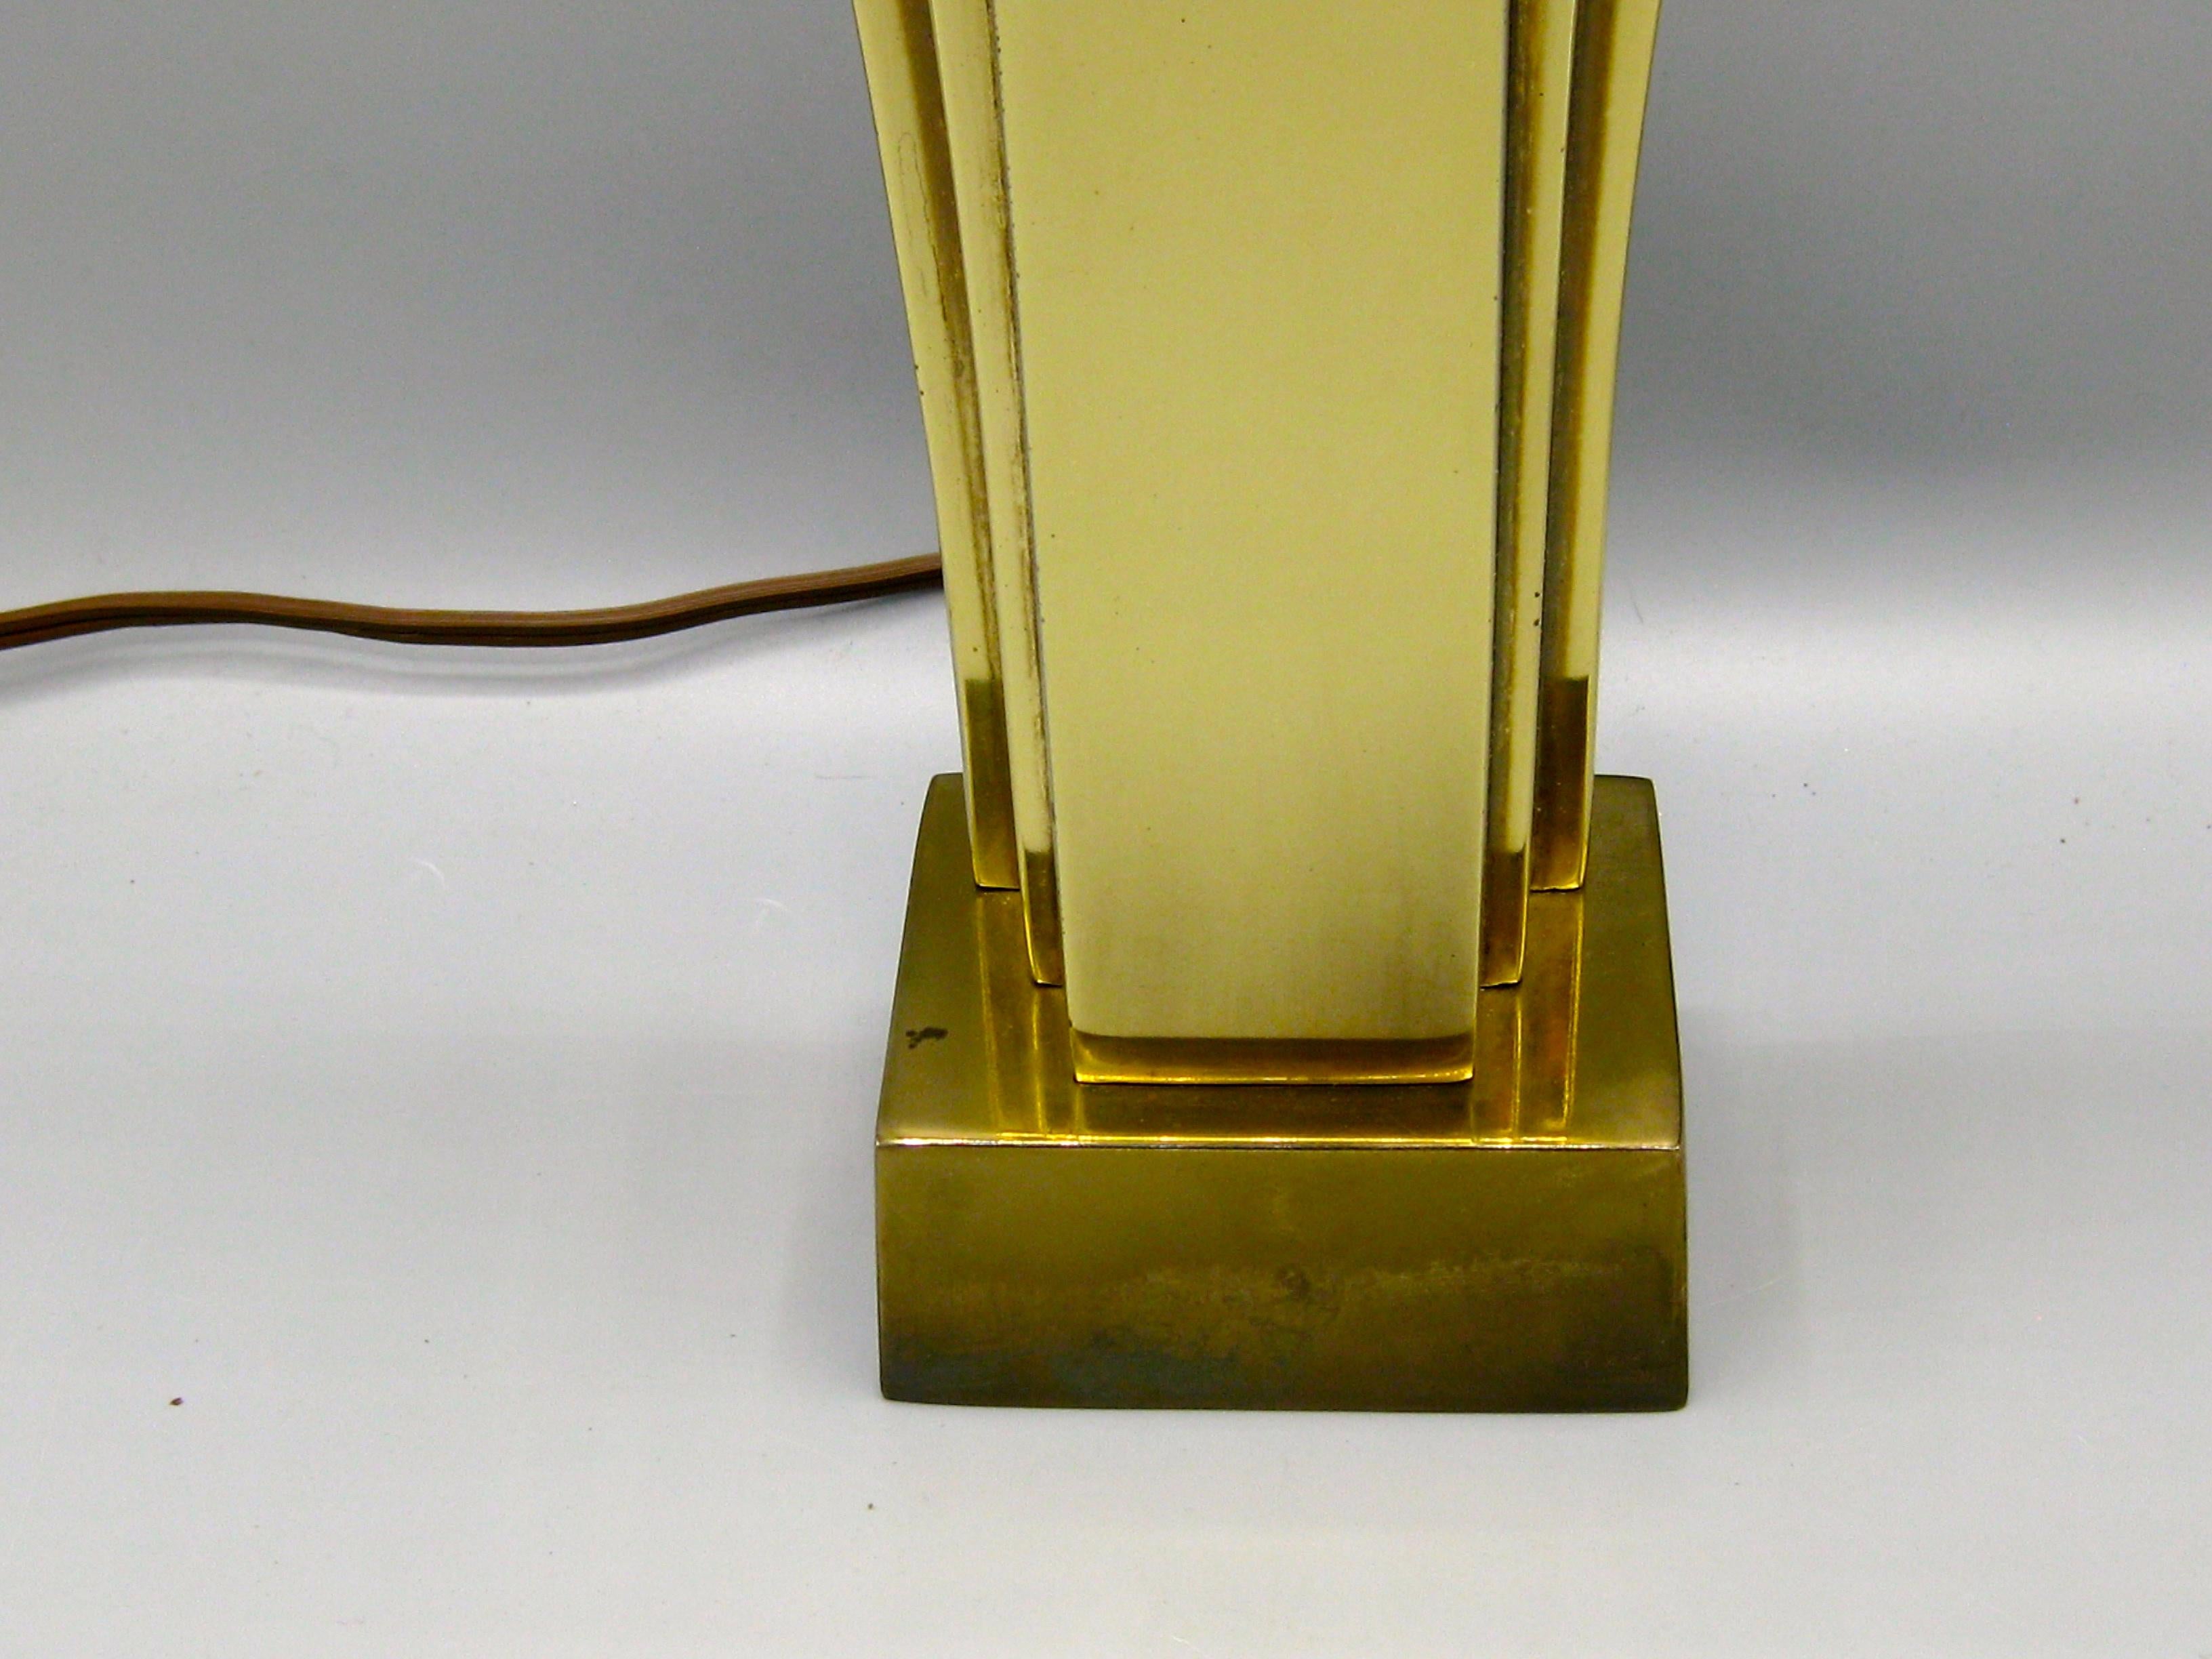 Stiffel Art Deco Revival Brass Desk or Table Fan Lamp Uplight, circa 1970s In Excellent Condition For Sale In San Diego, CA